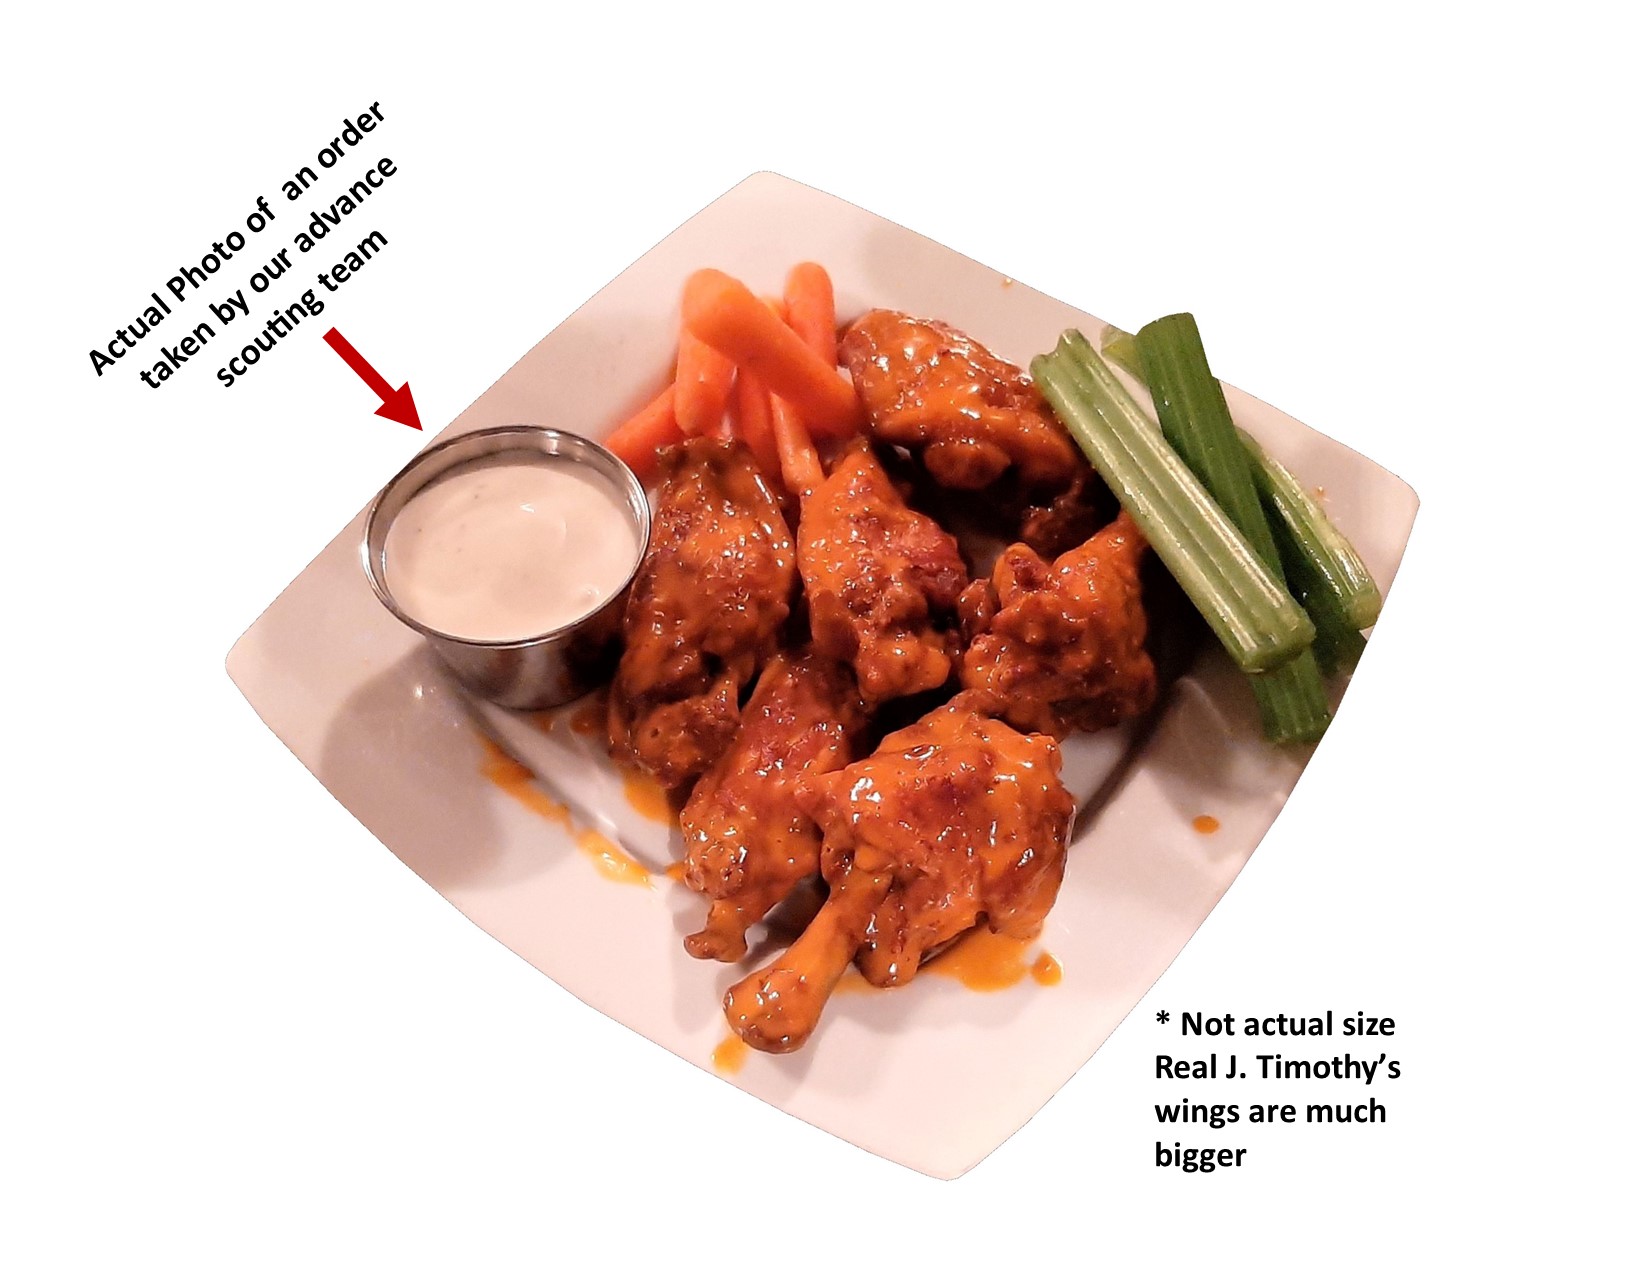 It’s back by popular demand – SuperBowl Grab and Go featuring J. Timothy’s wings!